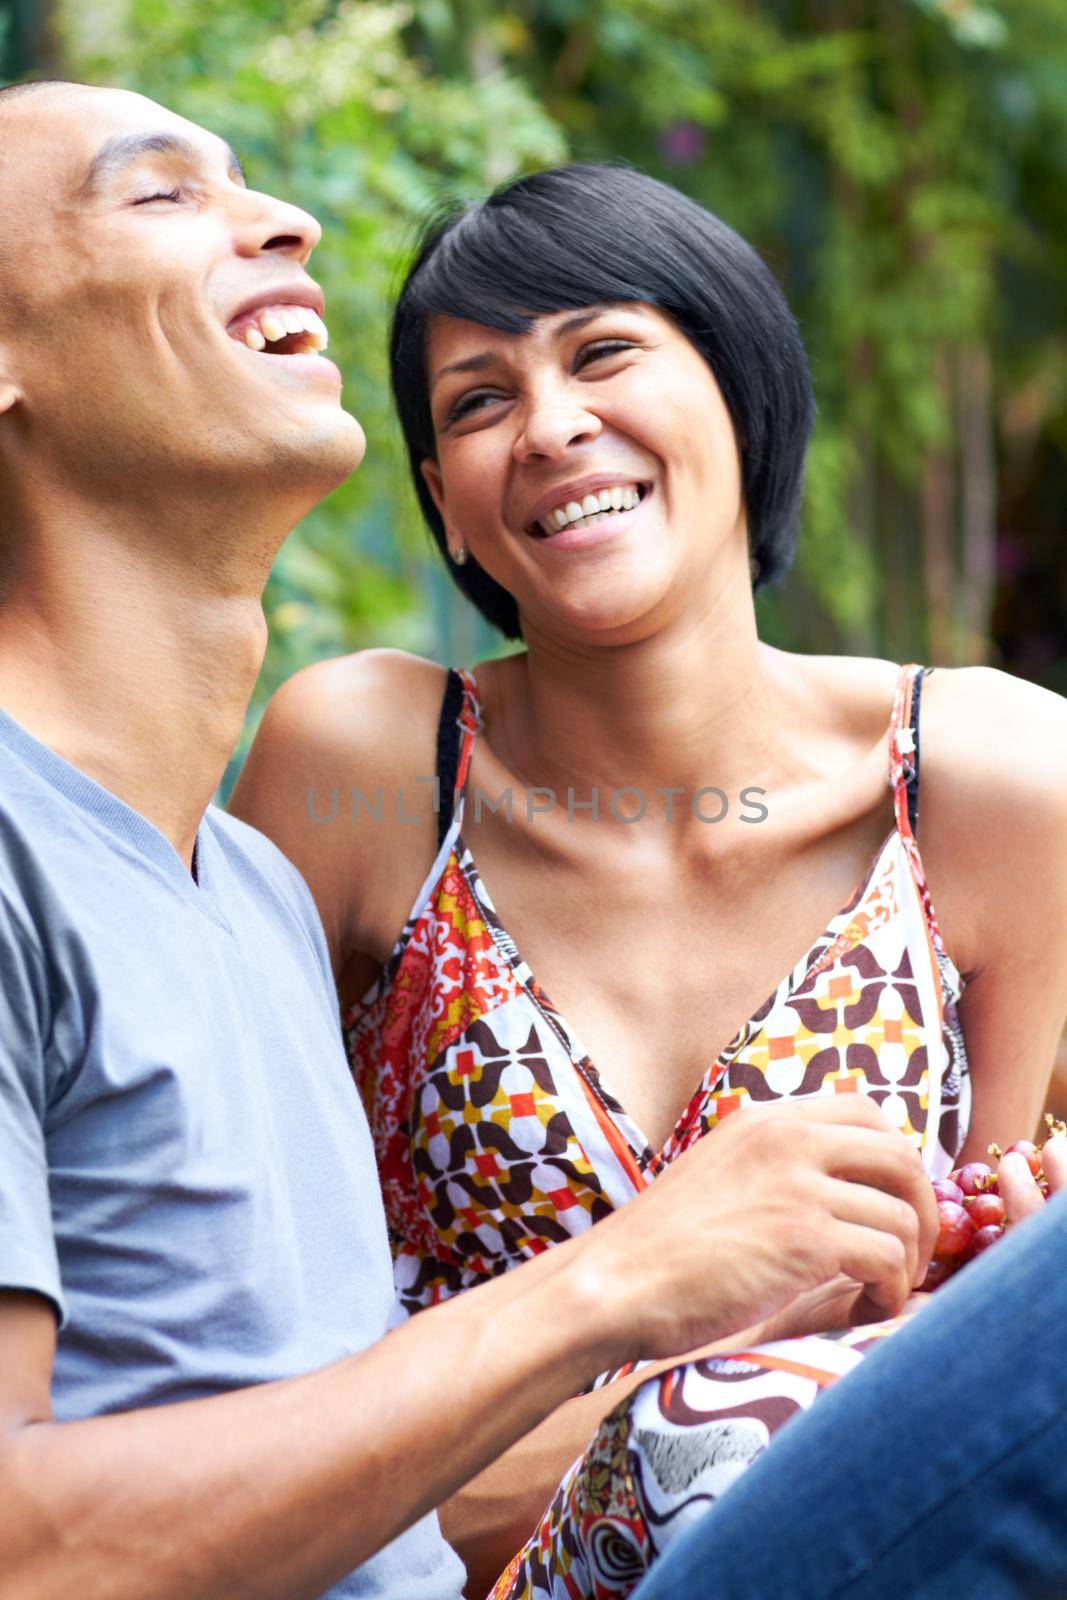 Love and laughter in the outdoors. Shot of a young couple enjoying the outdoors together. by YuriArcurs